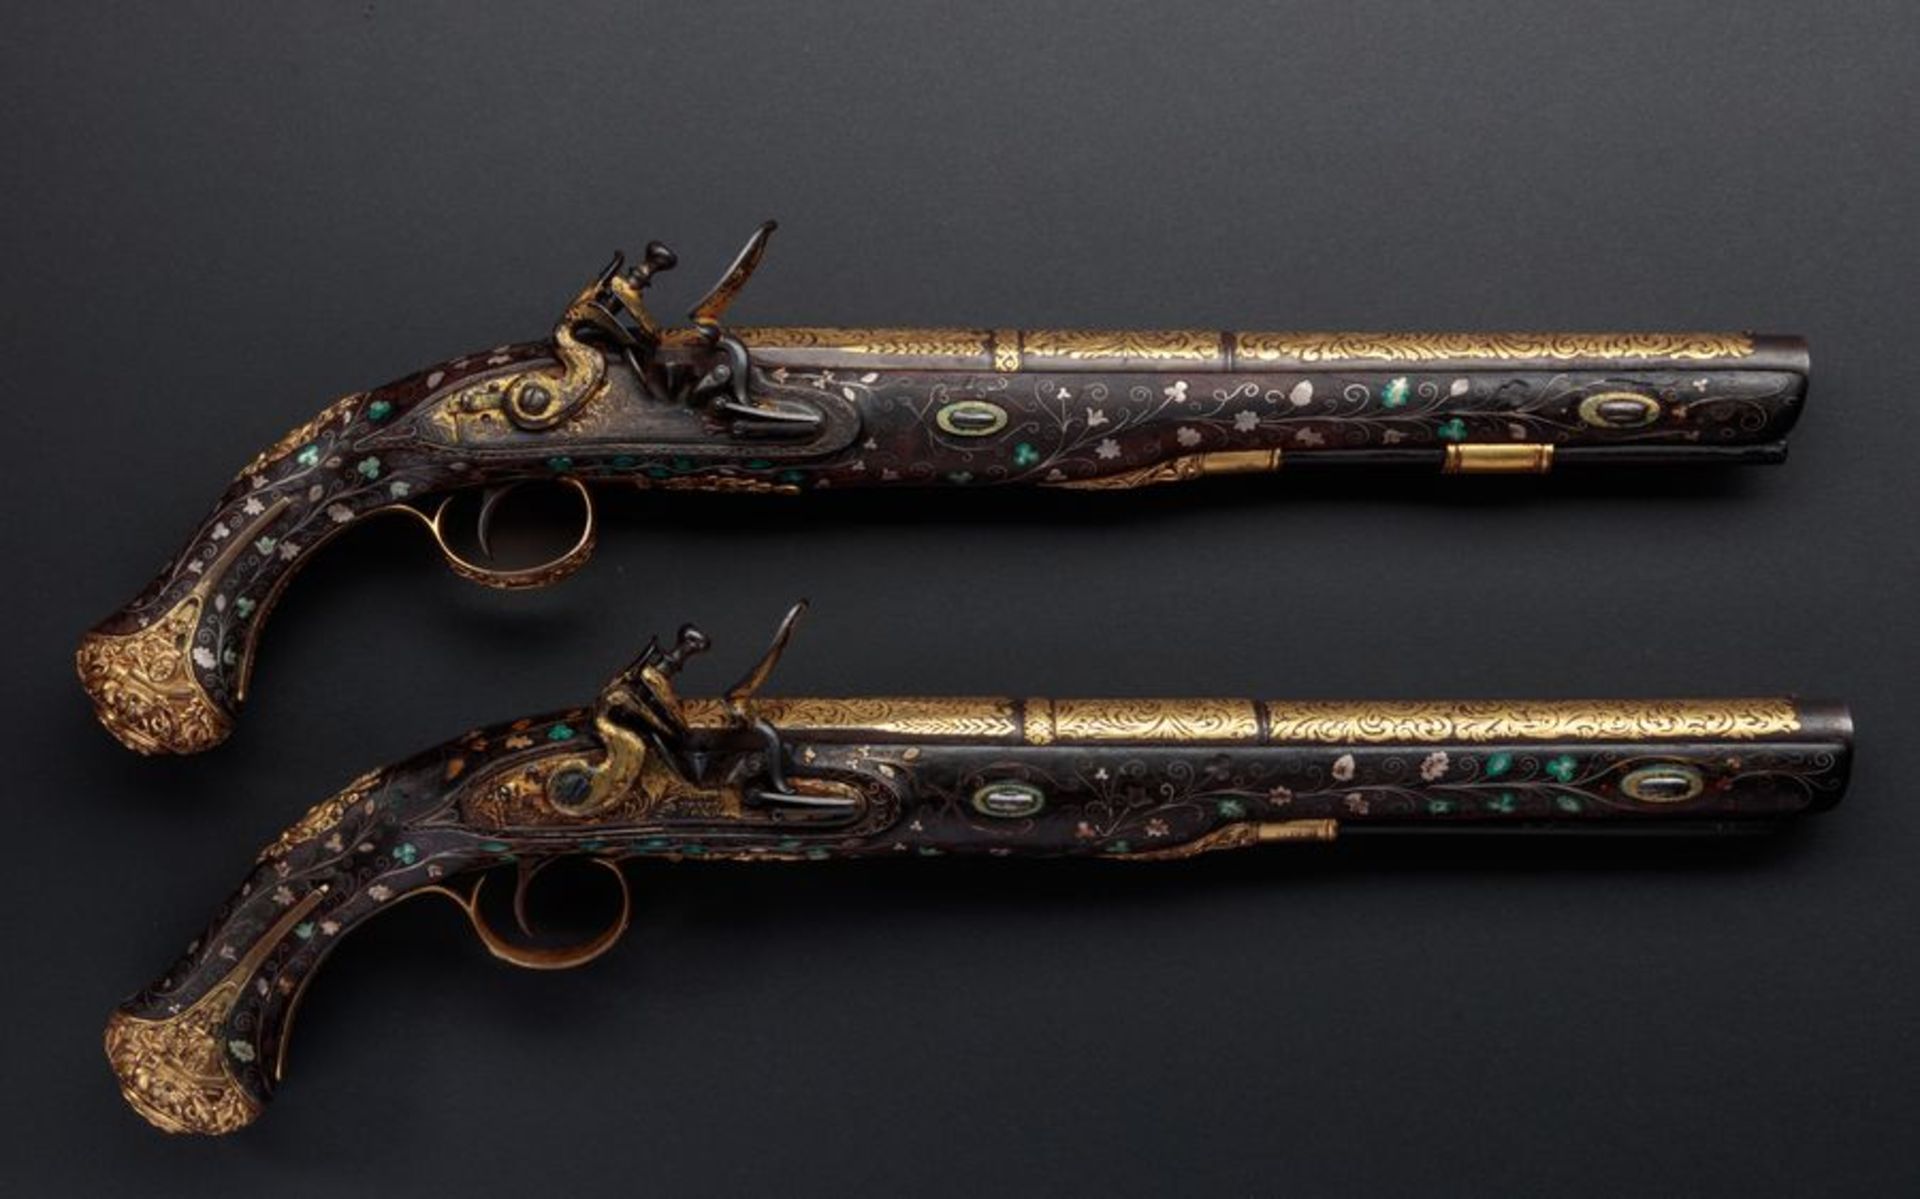 A pair of sumptuously decorated Turkish pistols with int locks, produced in England [...]